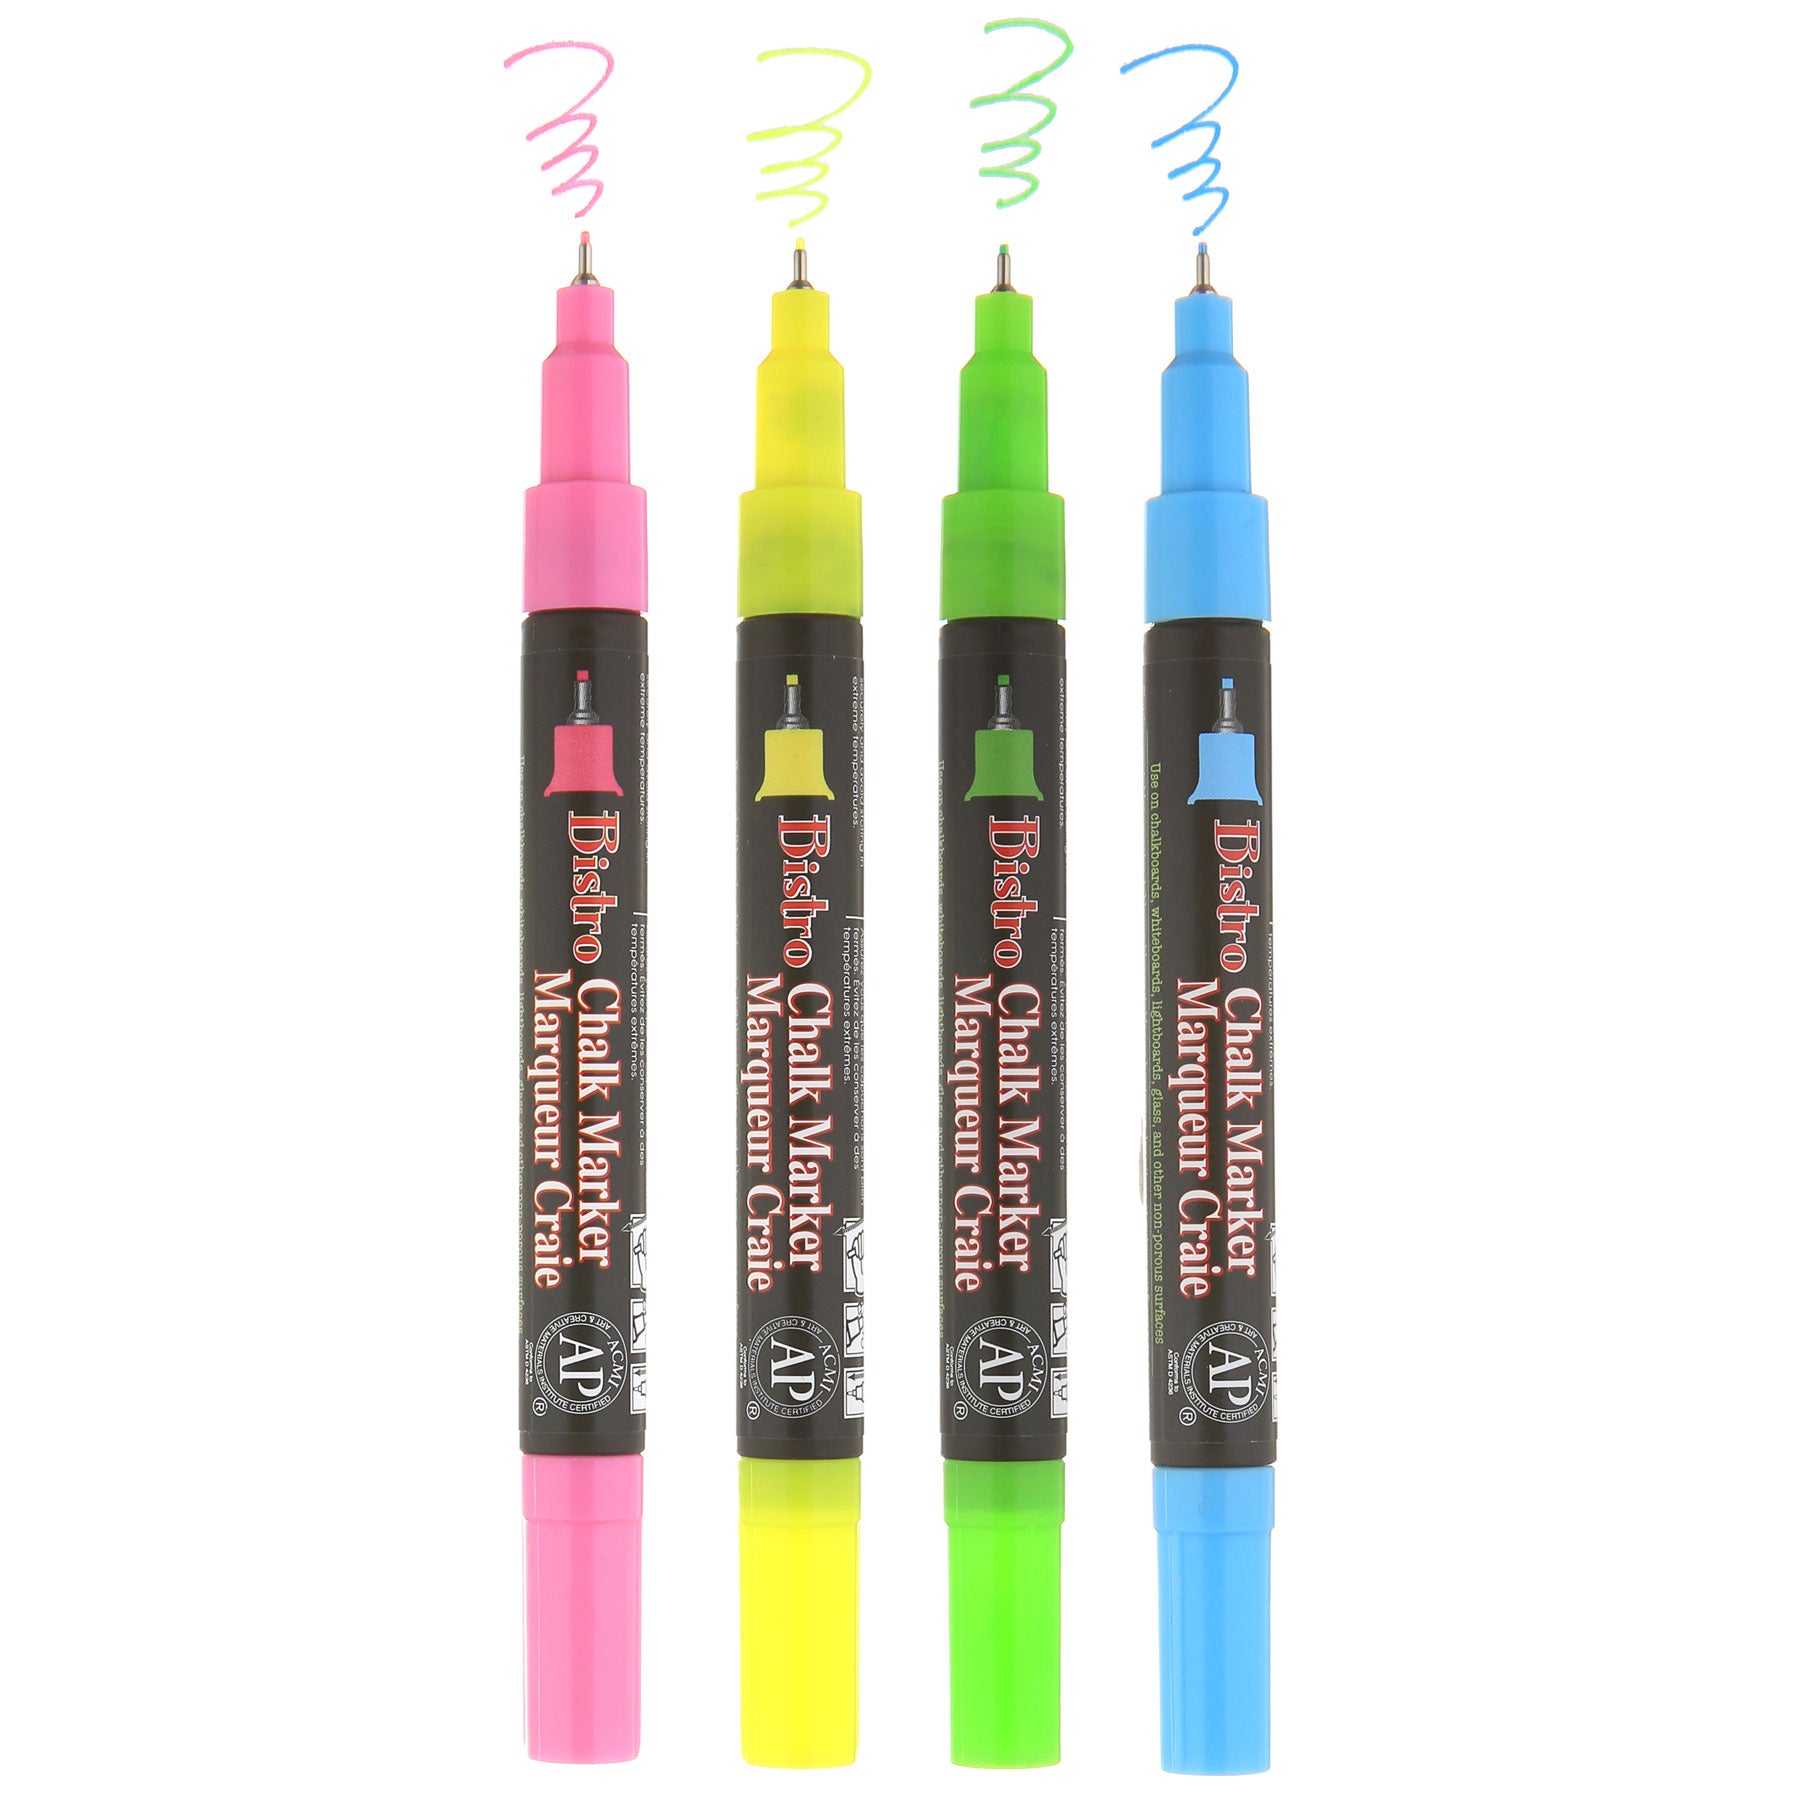 Waterproof Chalk Pen to Write or Draw Custom Labels, Tags and More (Se –  Simply Remarkable